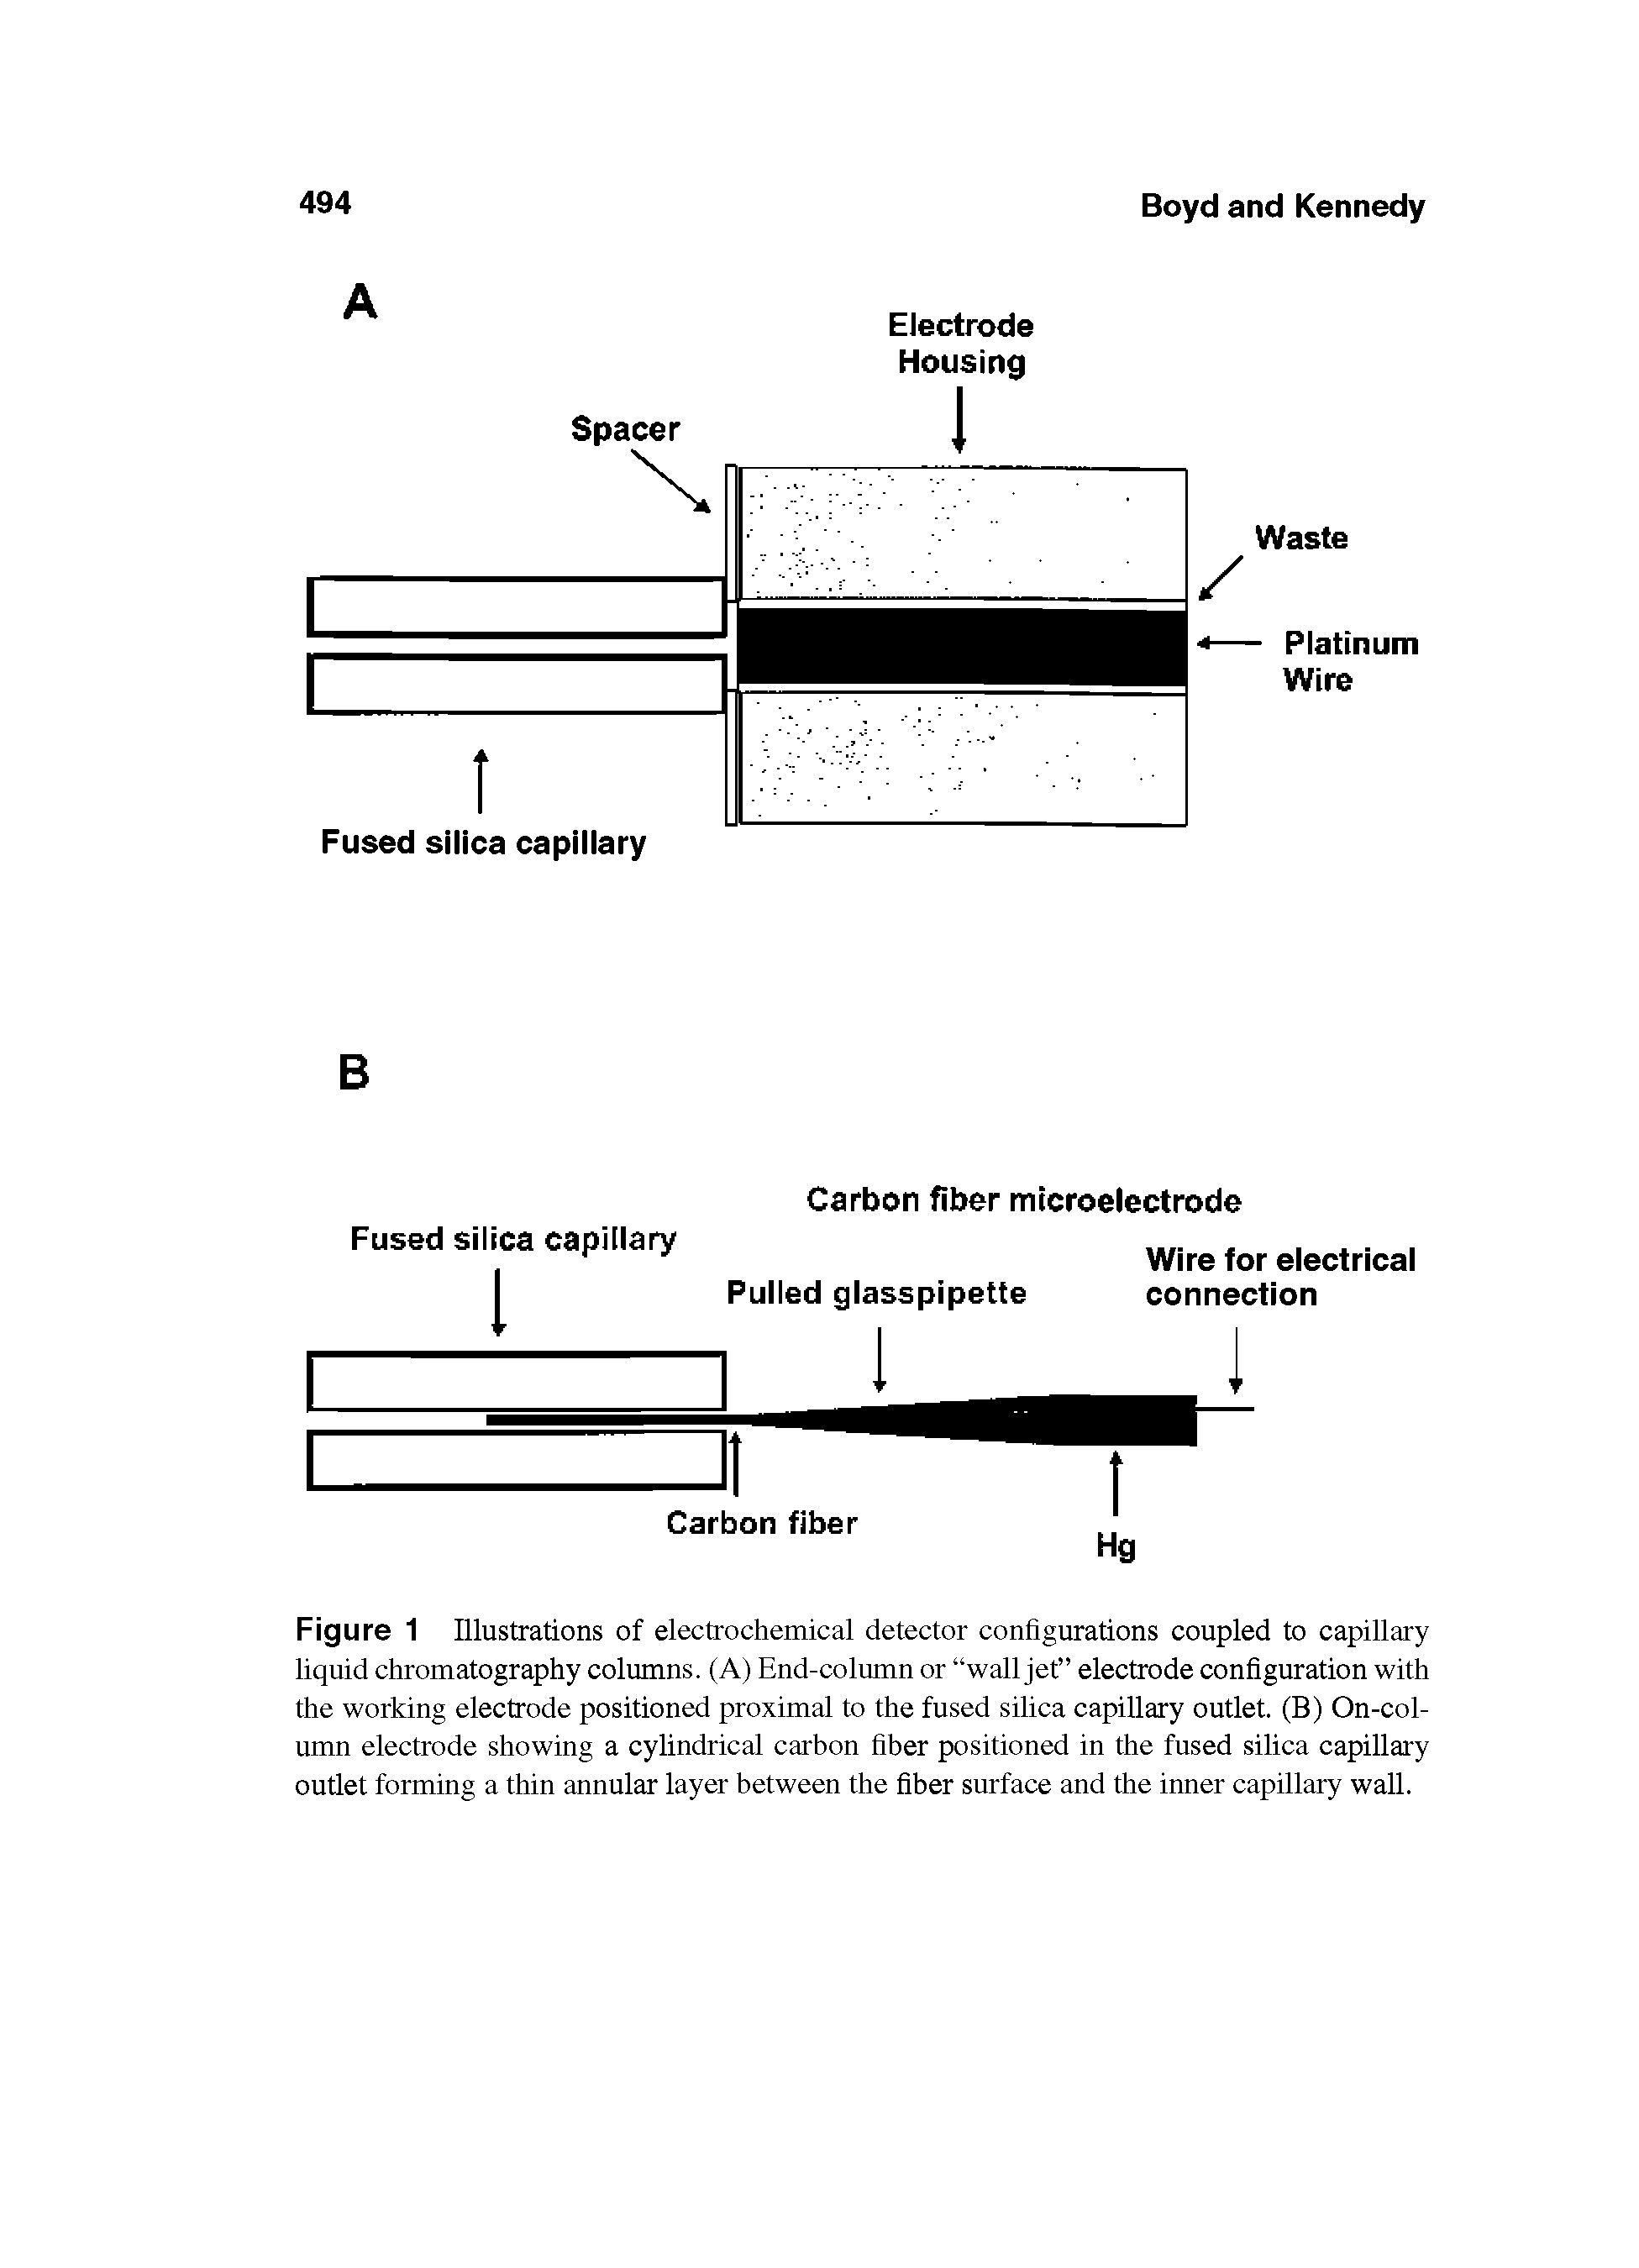 Figure 1 Illustrations of electrochemical detector configurations coupled to capillary liquid chromatography columns. (A) End-column or wall jet electrode configuration with the working electrode positioned proximal to the fused silica capillary outlet. (B) On-column electrode showing a cylindrical carbon fiber positioned in the fused silica capillary outlet forming a thin annular layer between the fiber surface and the inner capillary wall.